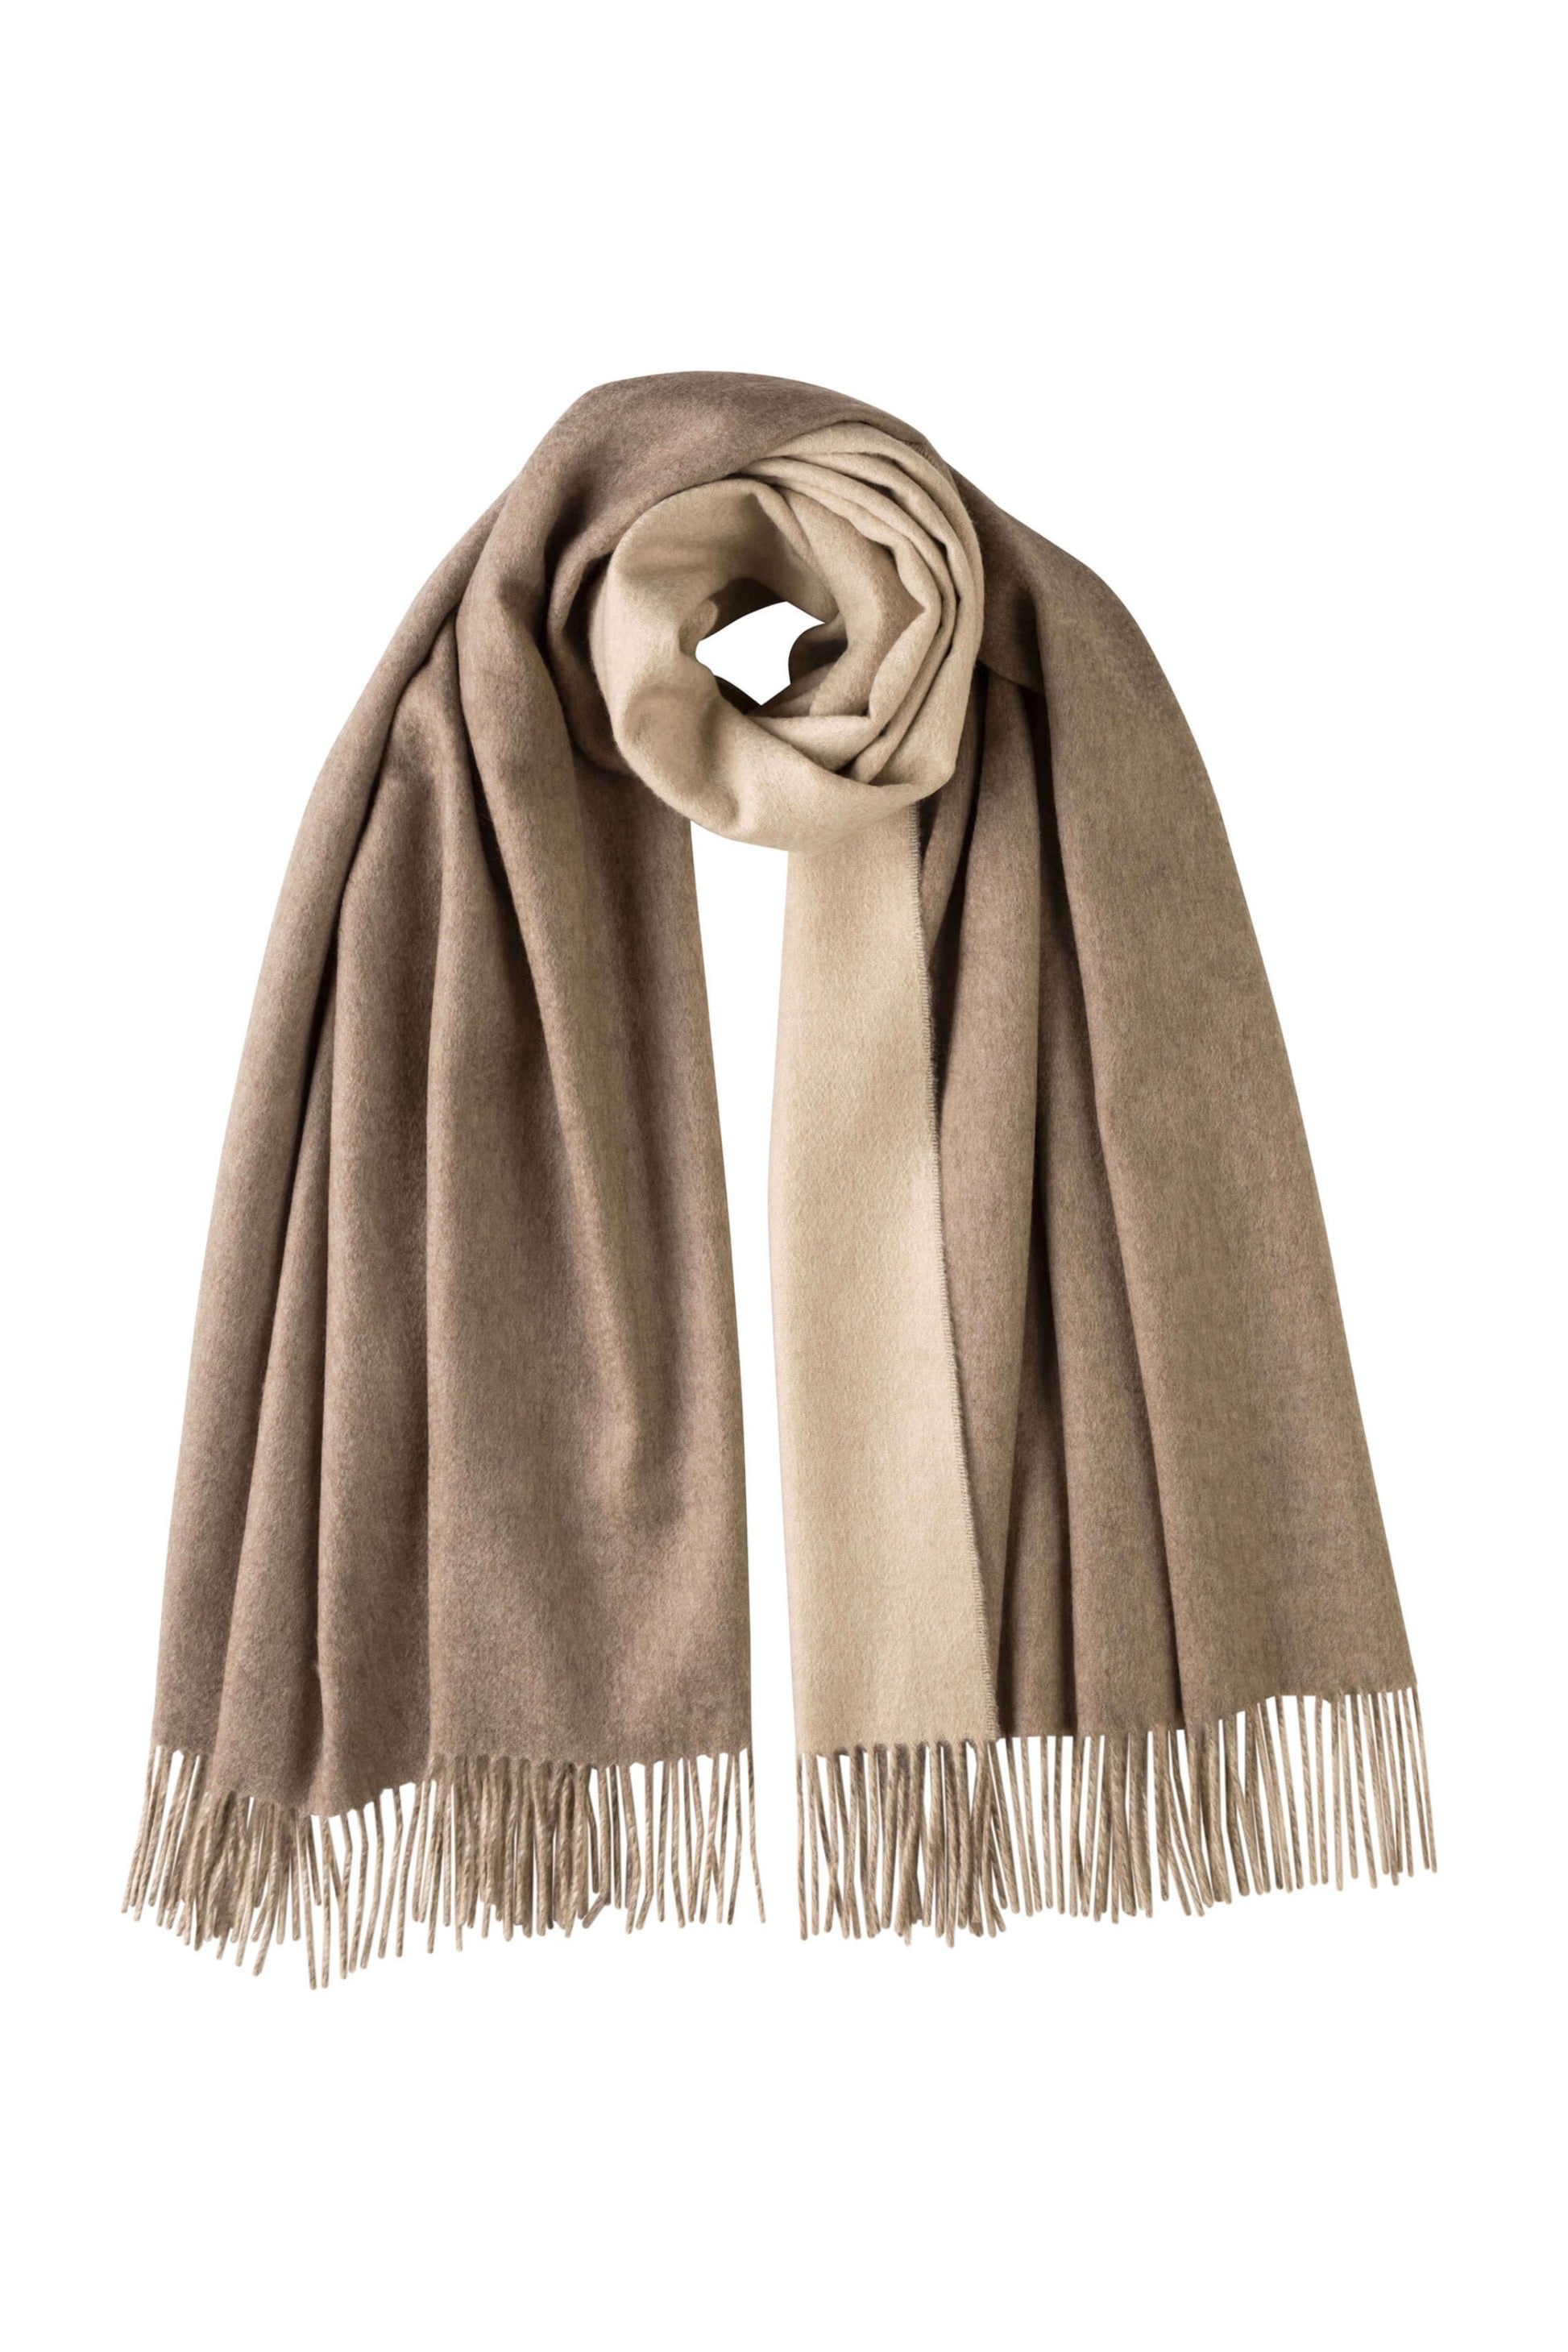 Johnstons of Elgin Reversible Cashmere Stole in Natural on a white background WA000585RU6040N/A